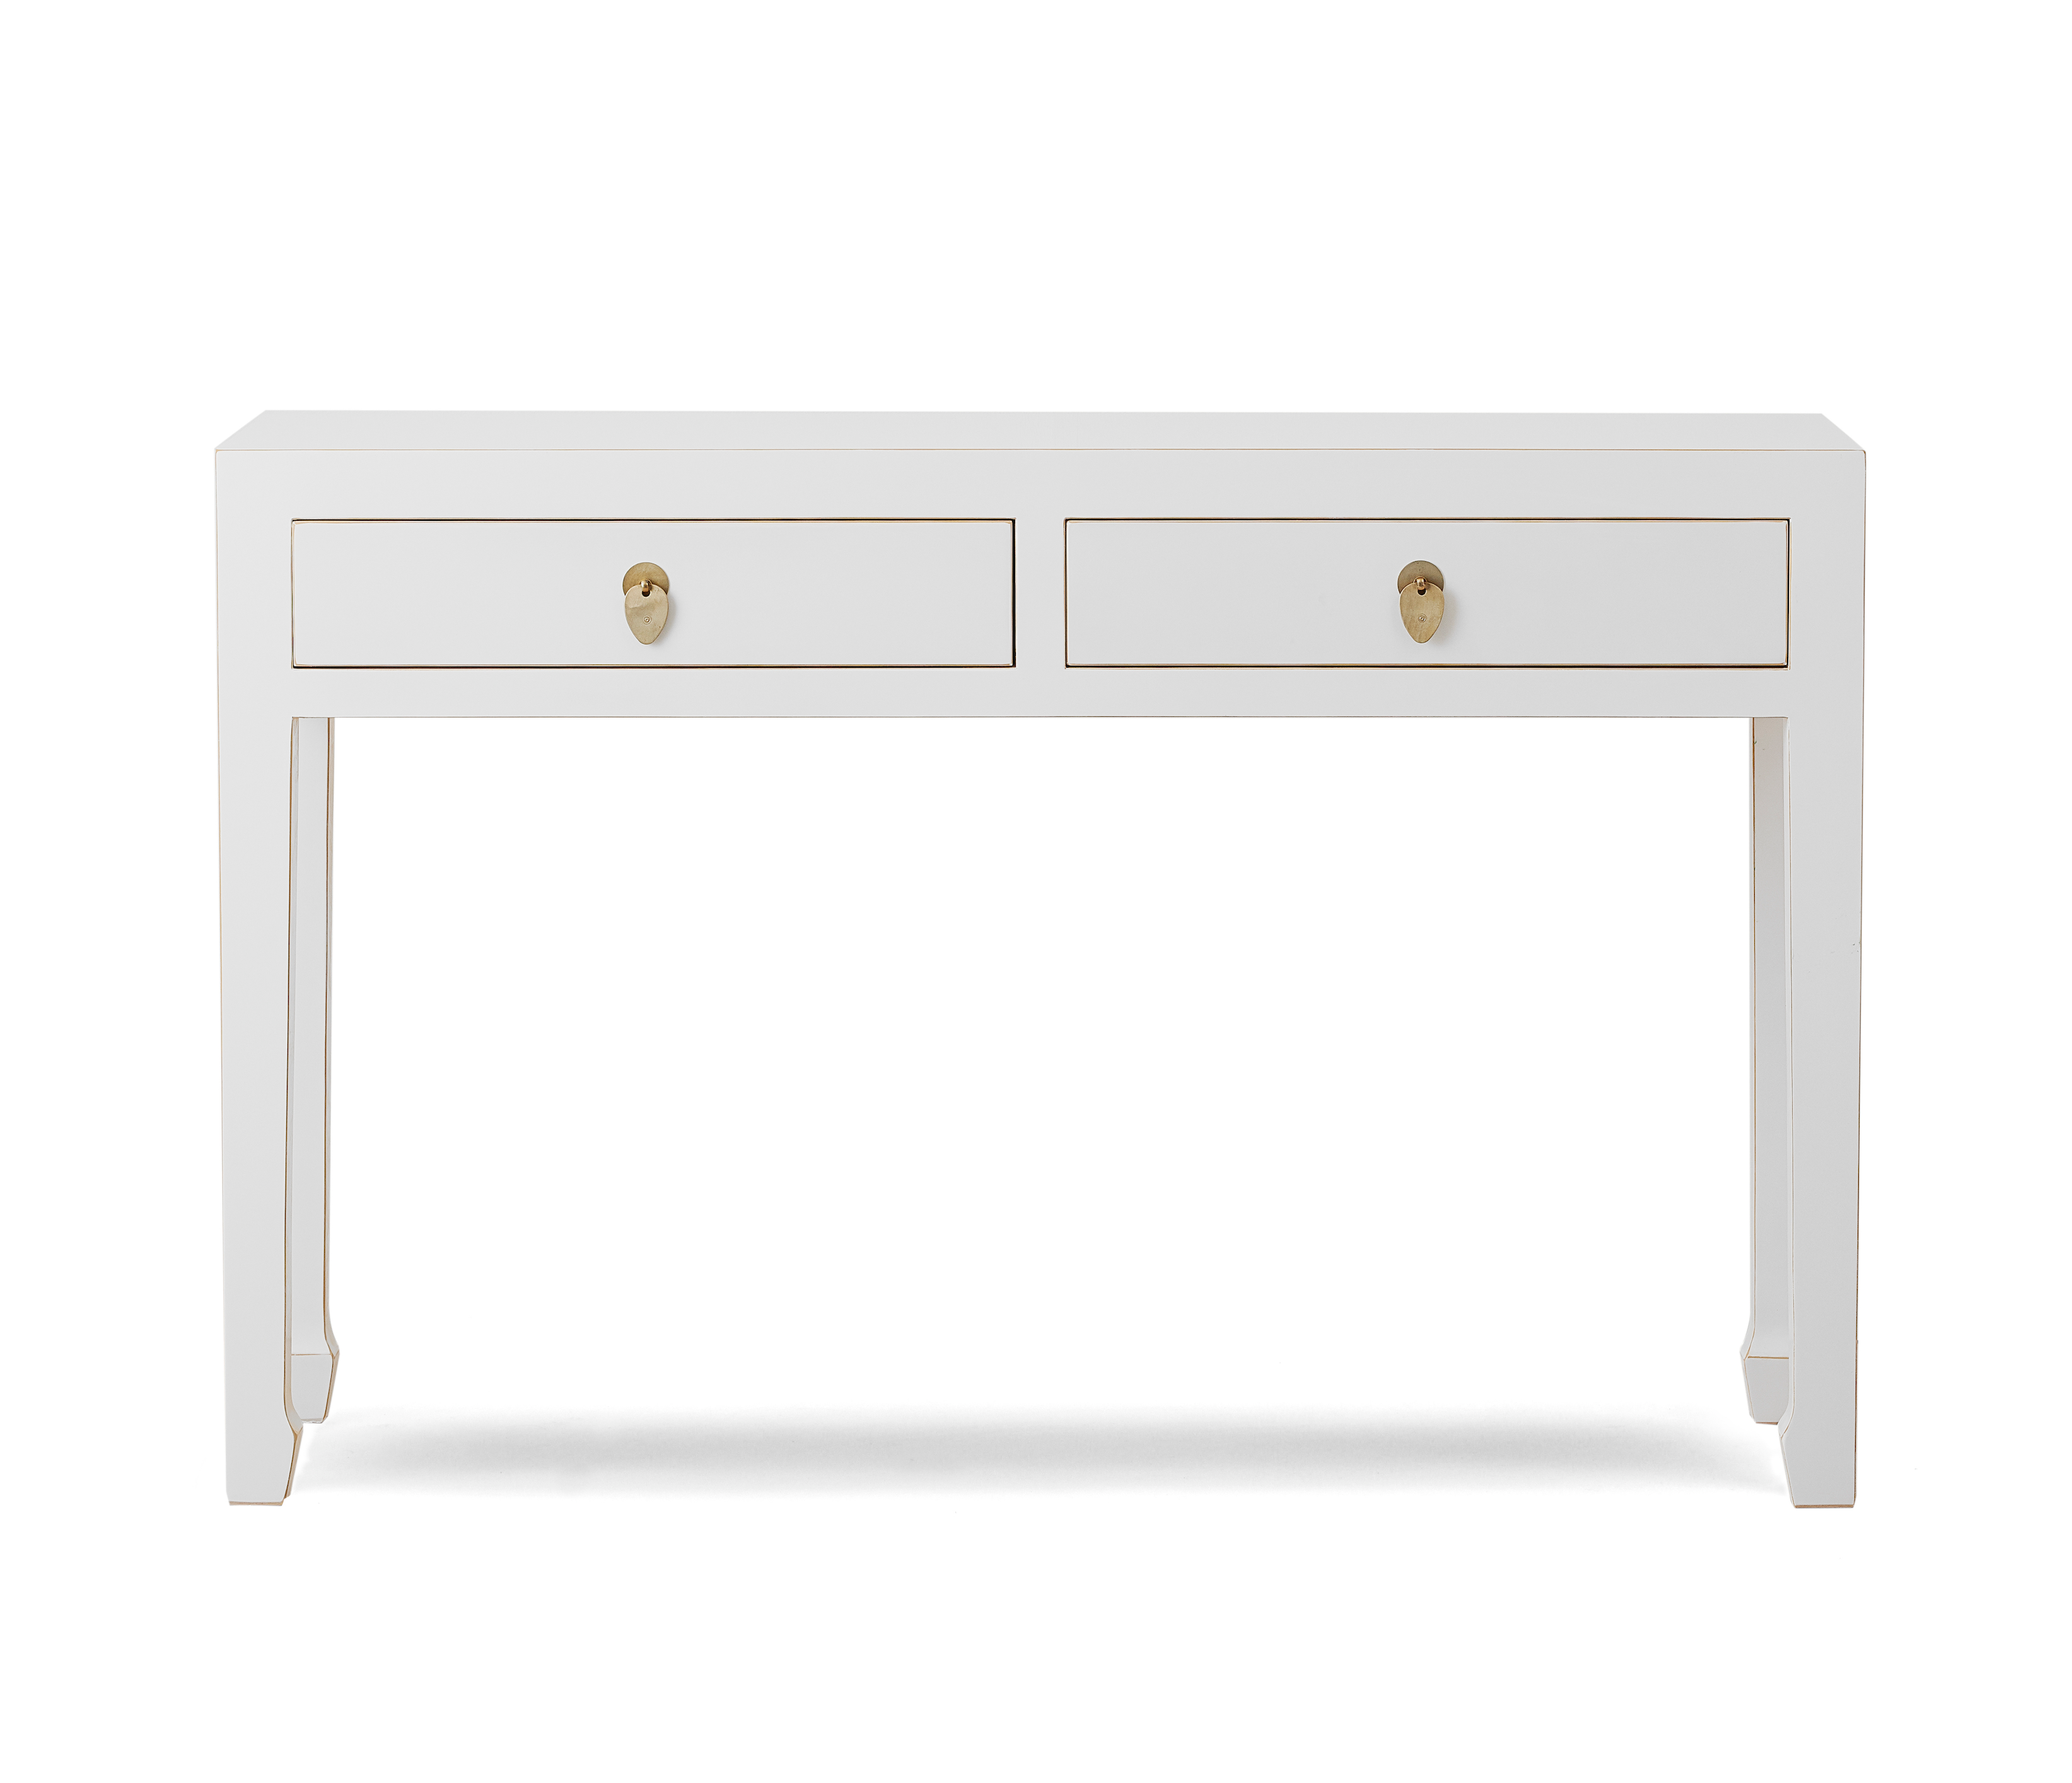 Qing white large console